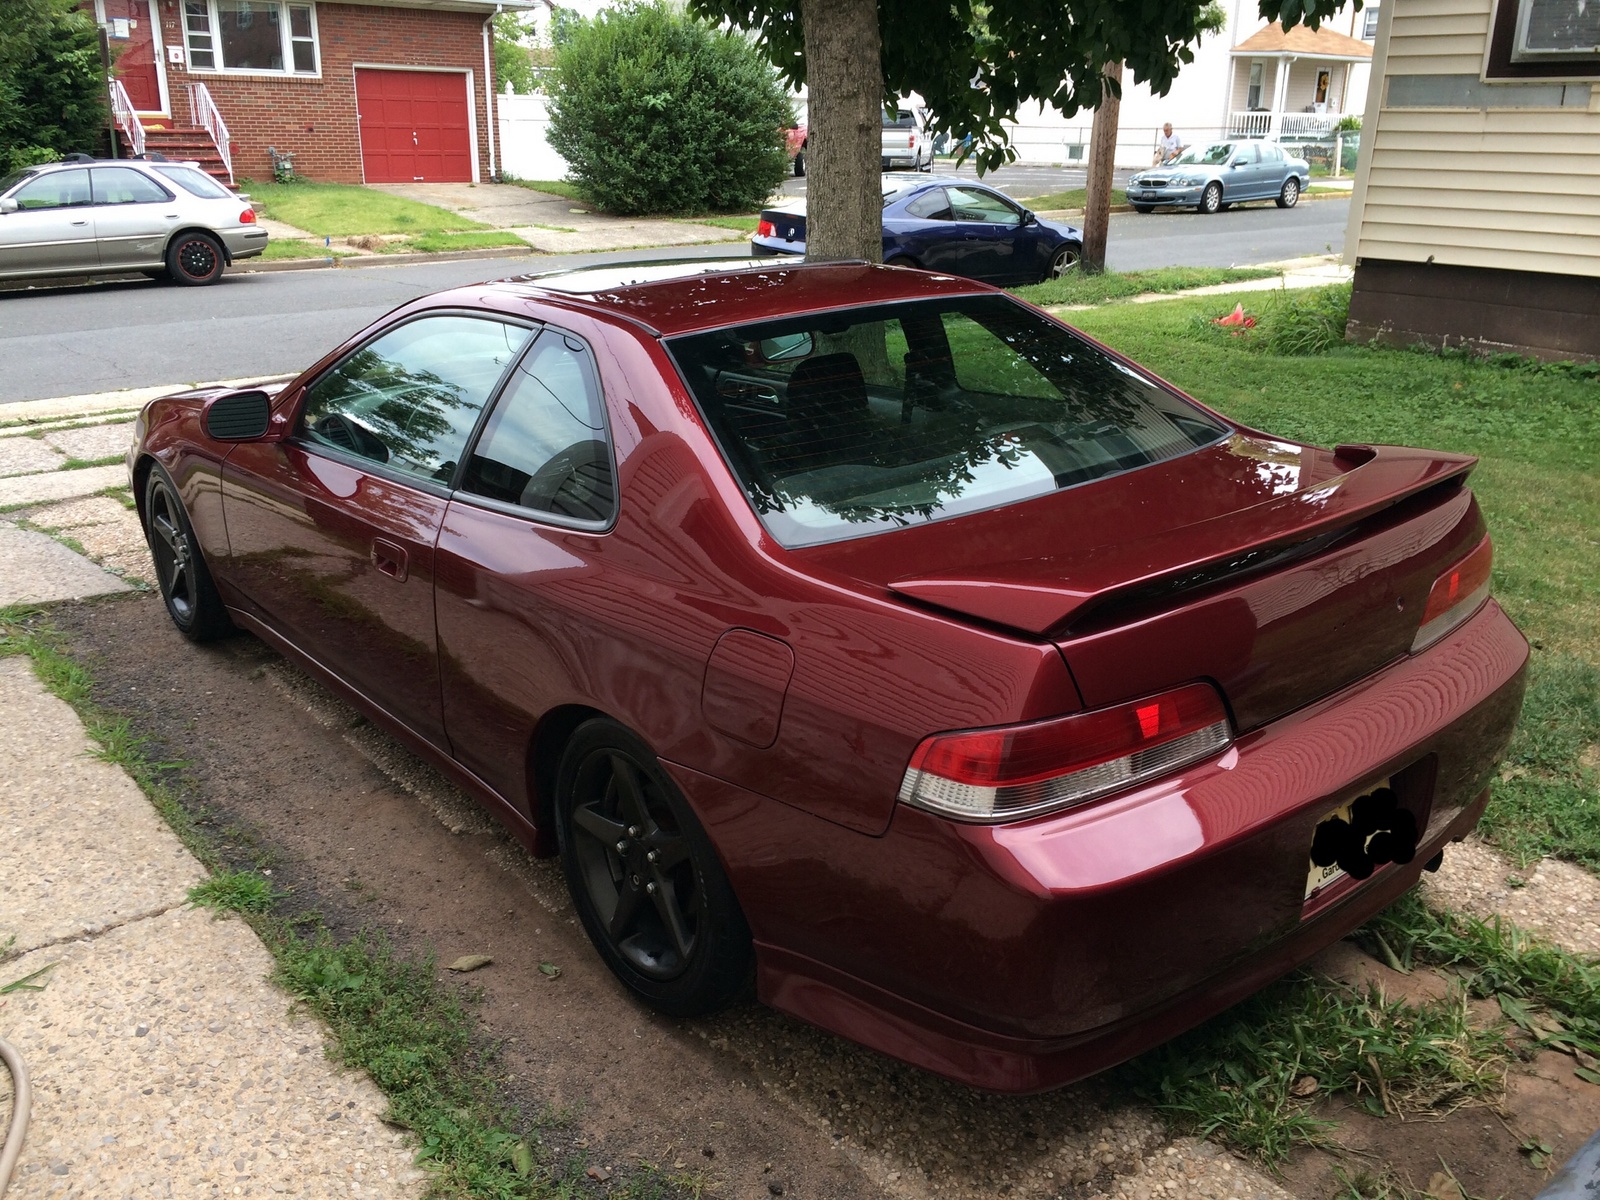 How much horsepower does a 1998 honda prelude have